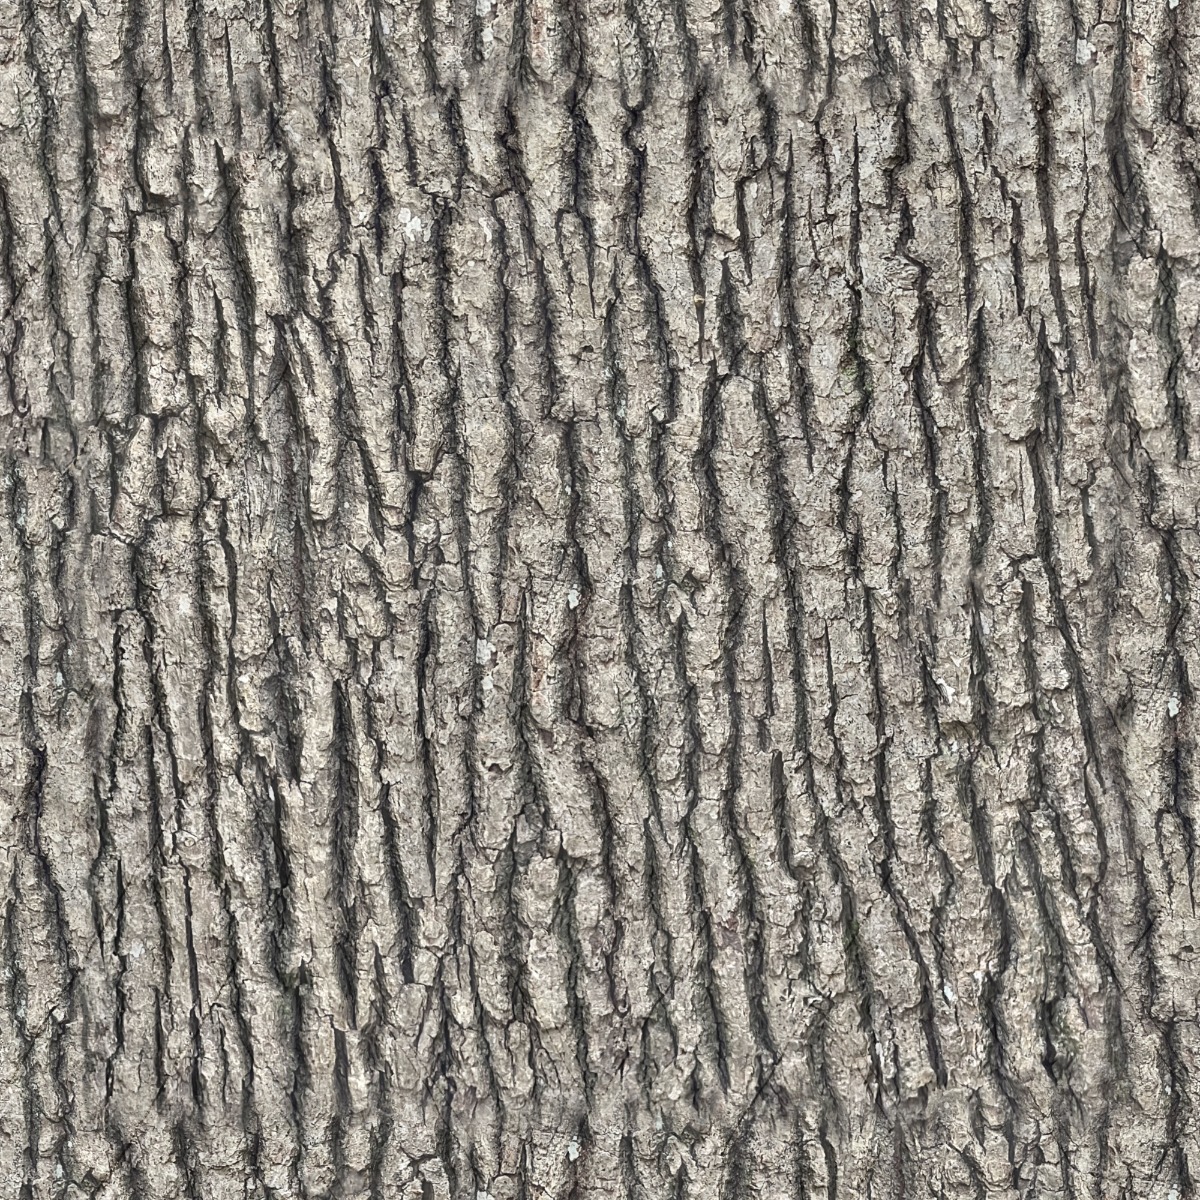 A seamless organic texture with tree bark units arranged in a None pattern